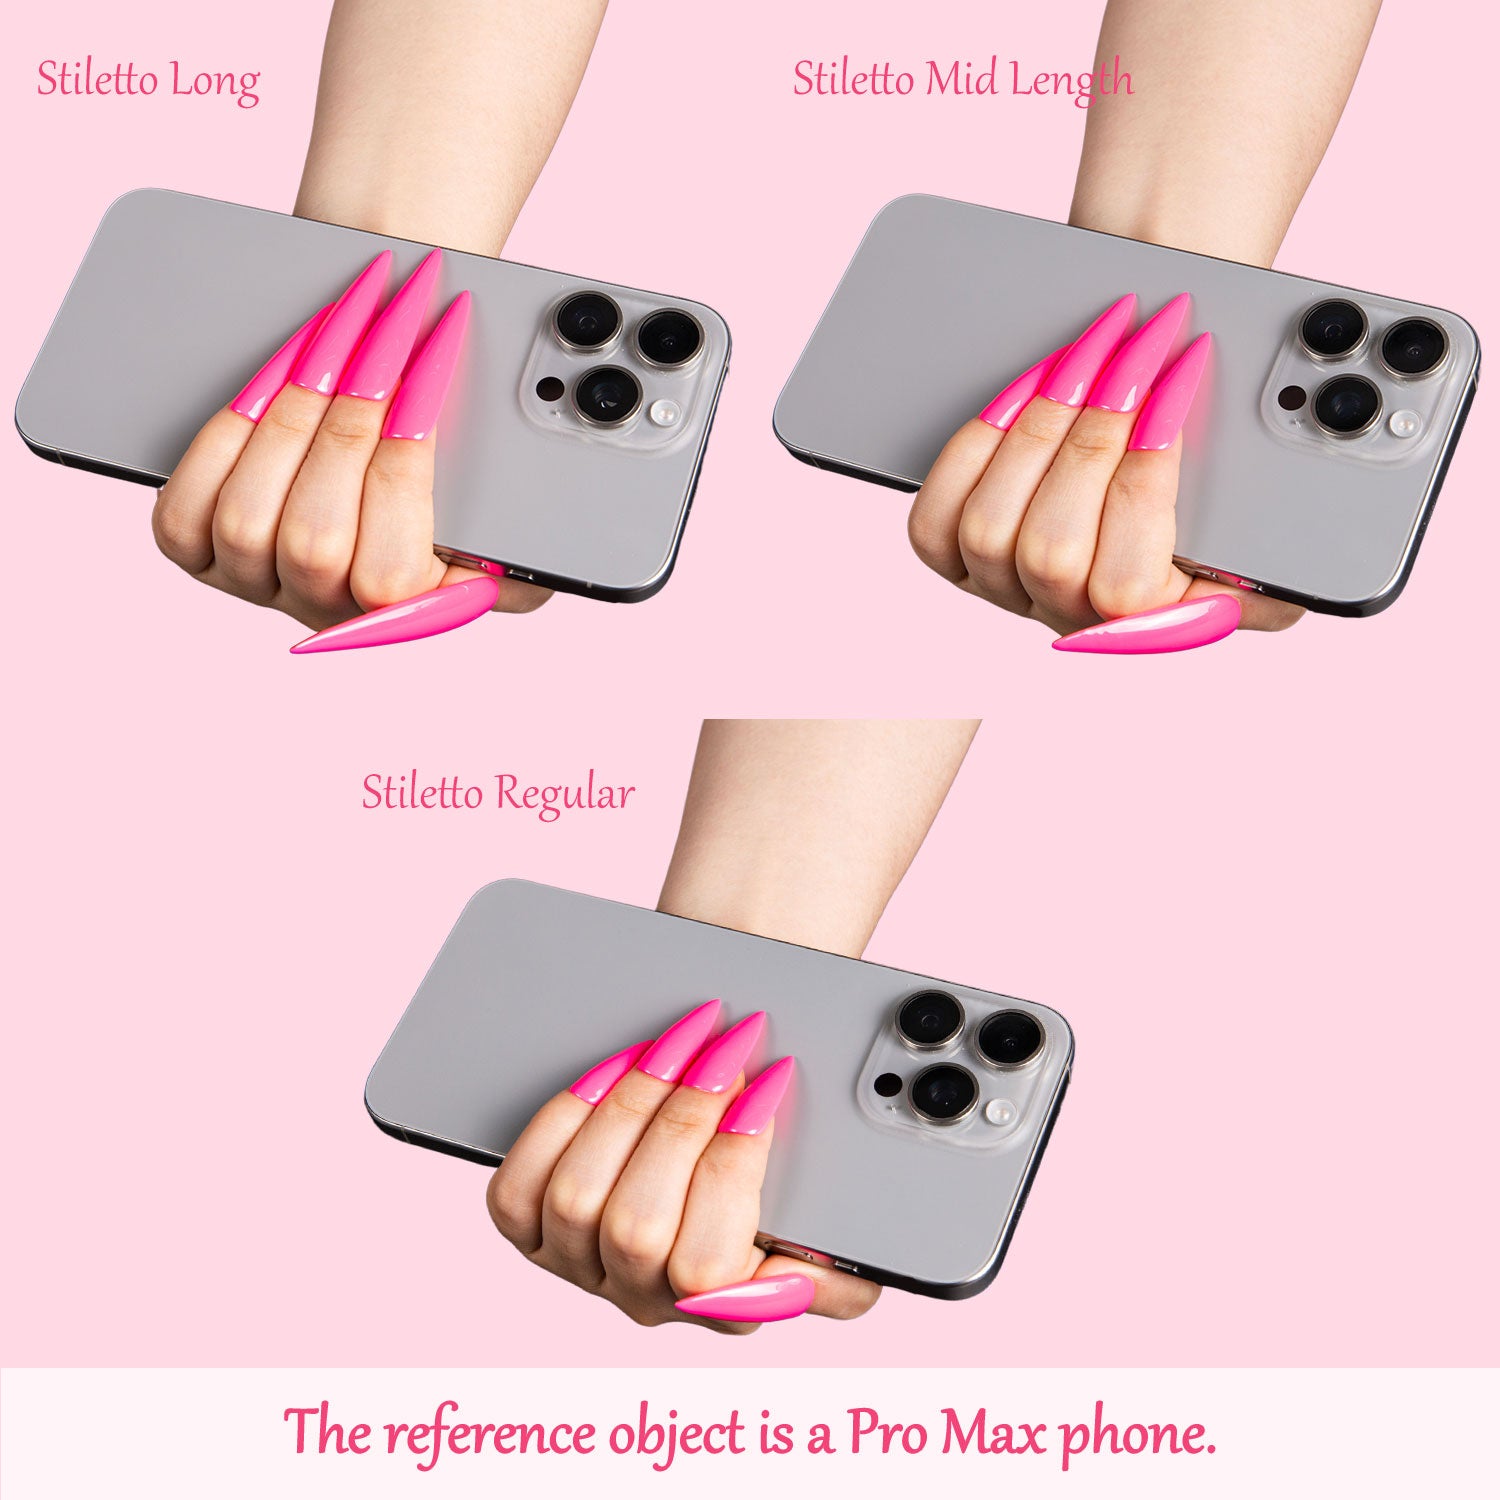 Comparison of three pink stiletto press-on nails in Long, Mid Length, and Regular lengths, each held by a hand grasping an iPhone Pro Max. Text indicates nail lengths and references the iPhone Pro Max for size comparison.